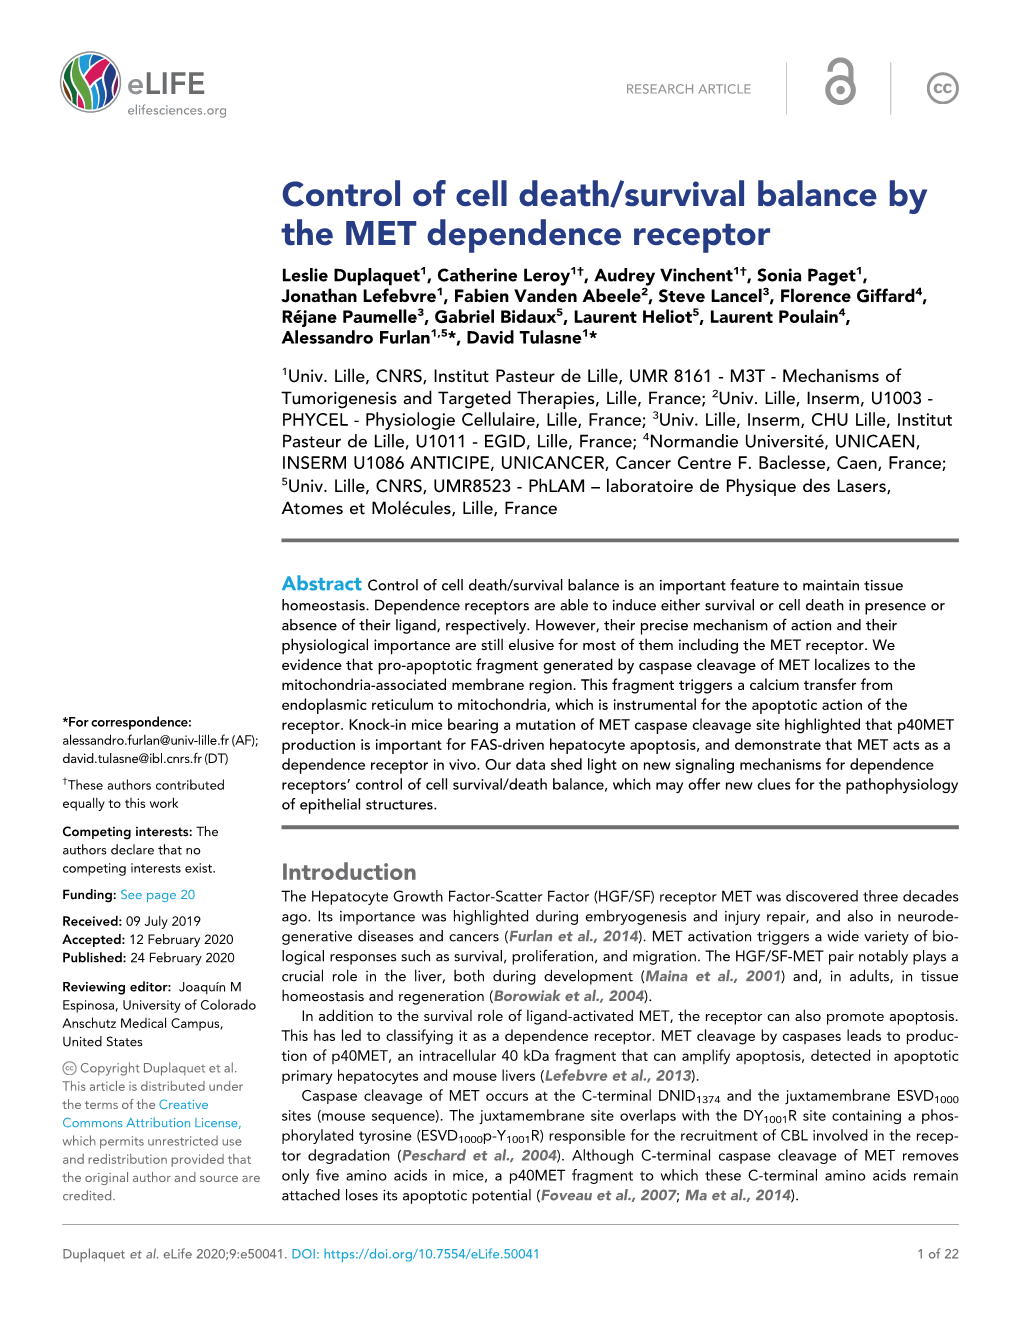 Control of Cell Death/Survival Balance by the MET Dependence Receptor